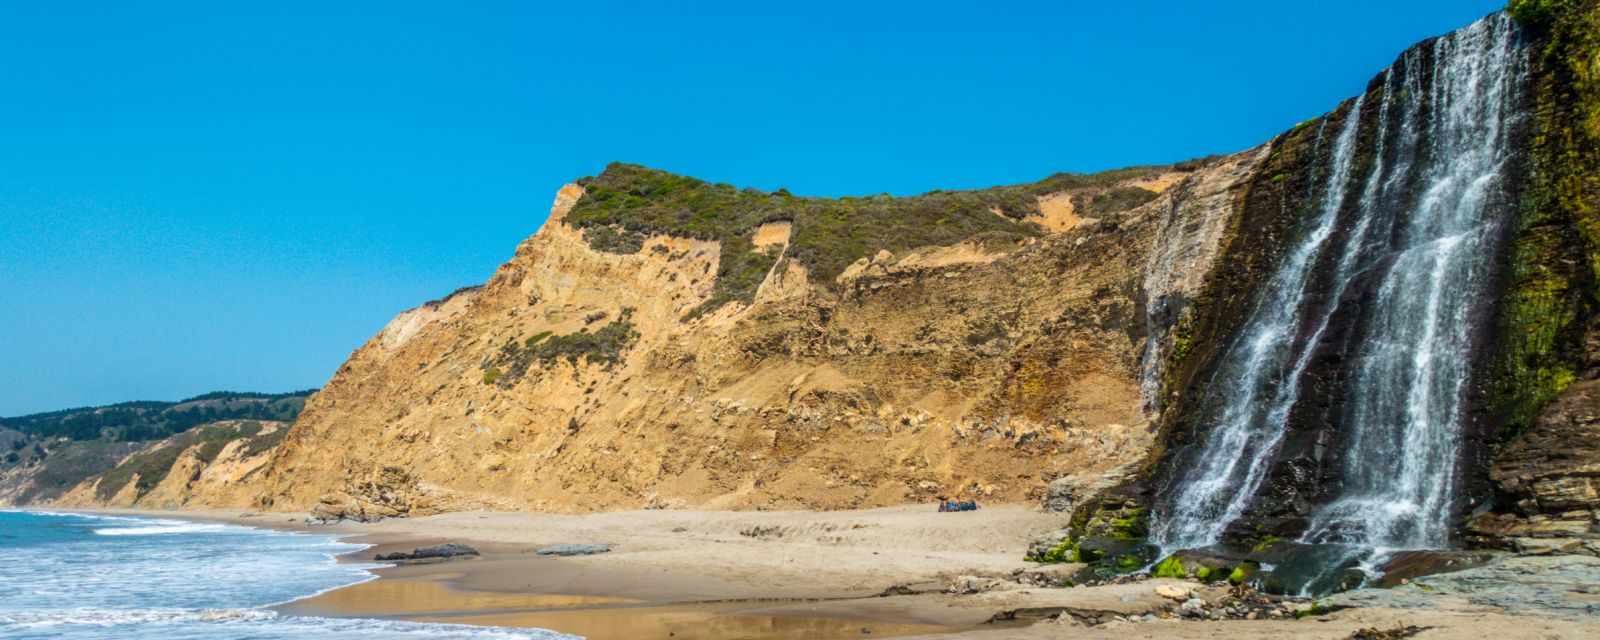 3 Hikes to Alamere Falls in Point Reyes & 8 Tips What to Pack